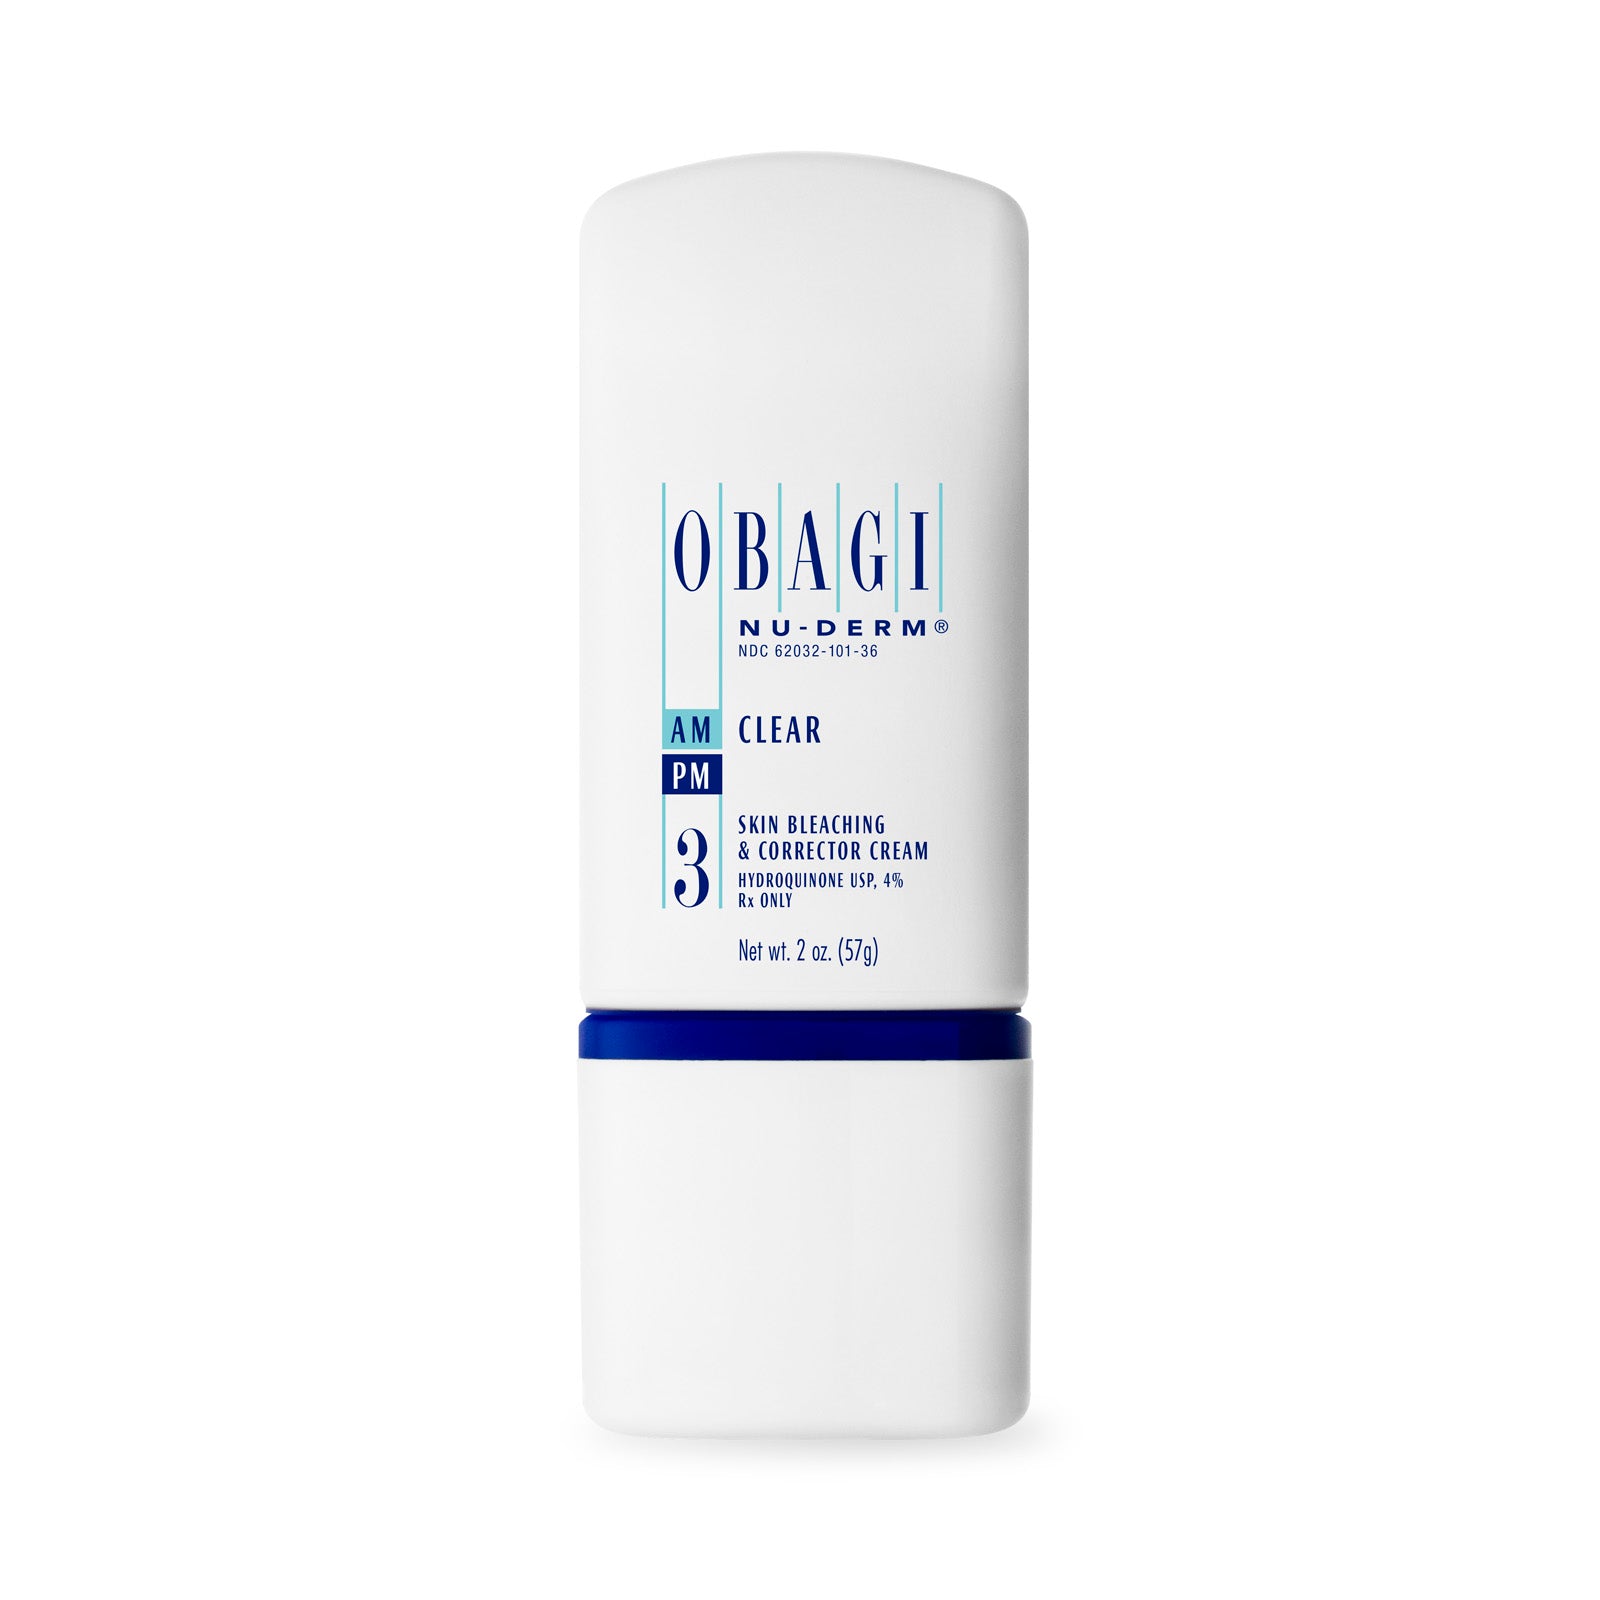 Obagi Nu-Derm Transformation Kit Norm-Oily Complete skin transformation system - Beauty By Vianna